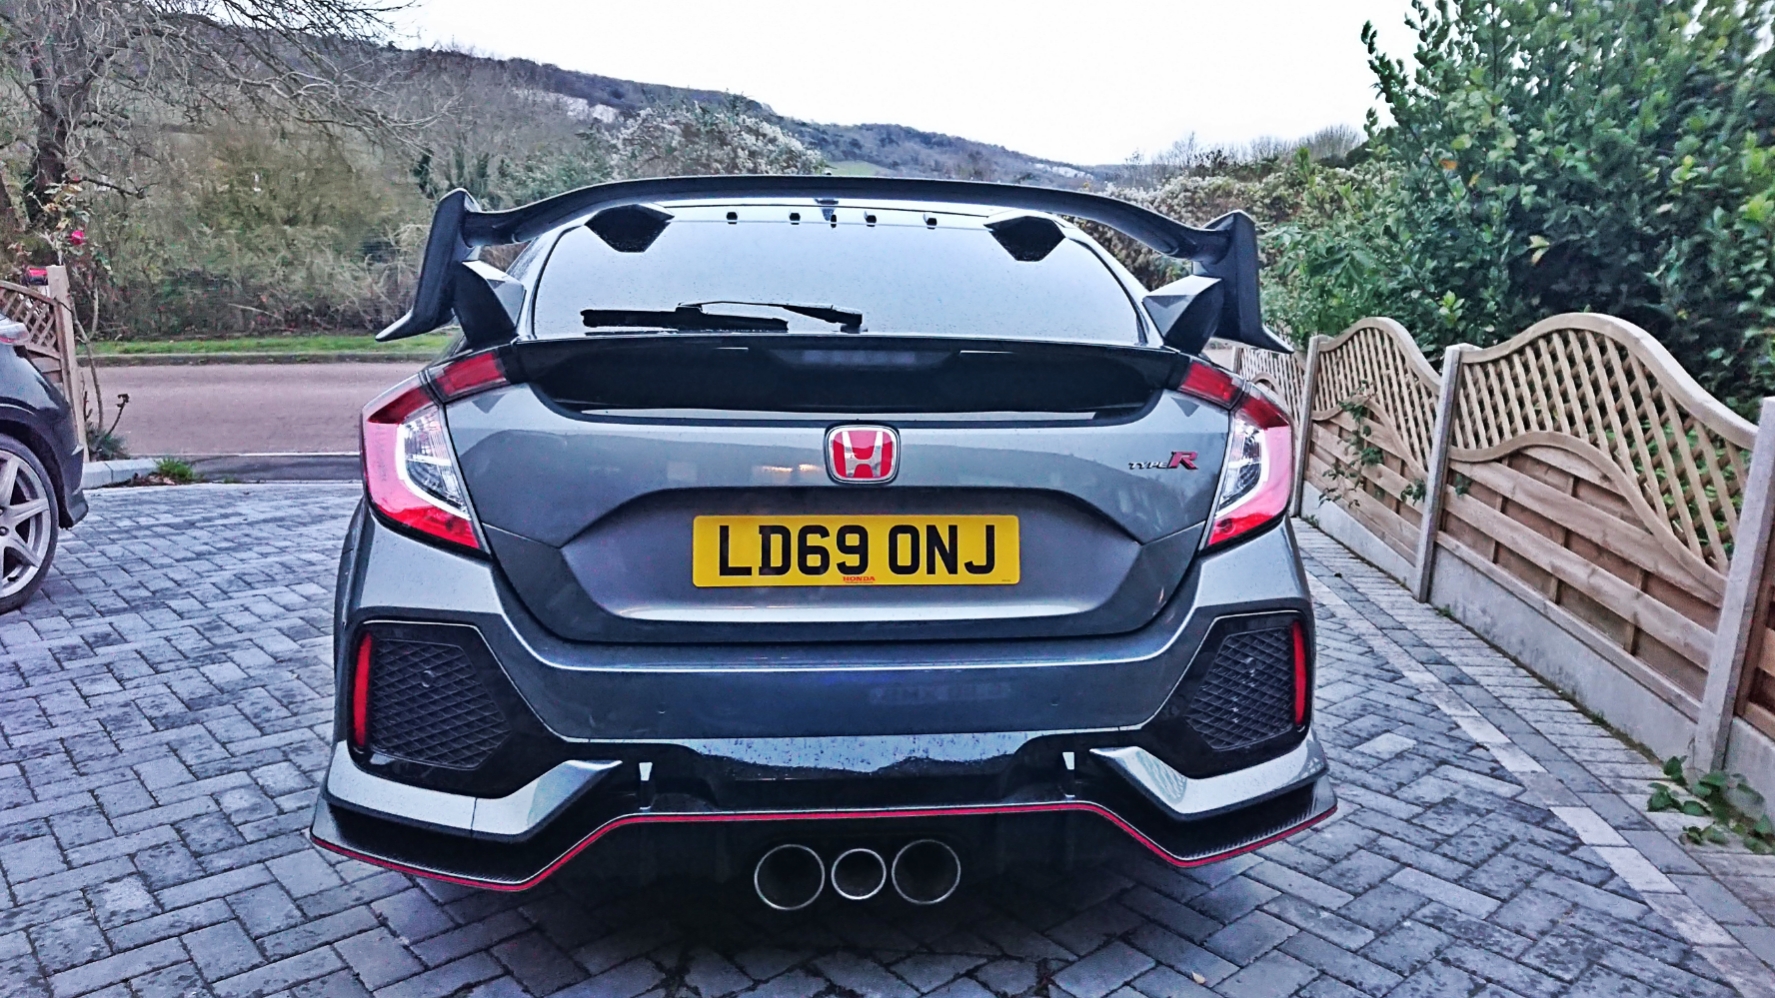 Civic Type R FK8. Shall I go mental? - Page 3 - Car Buying - PistonHeads UK